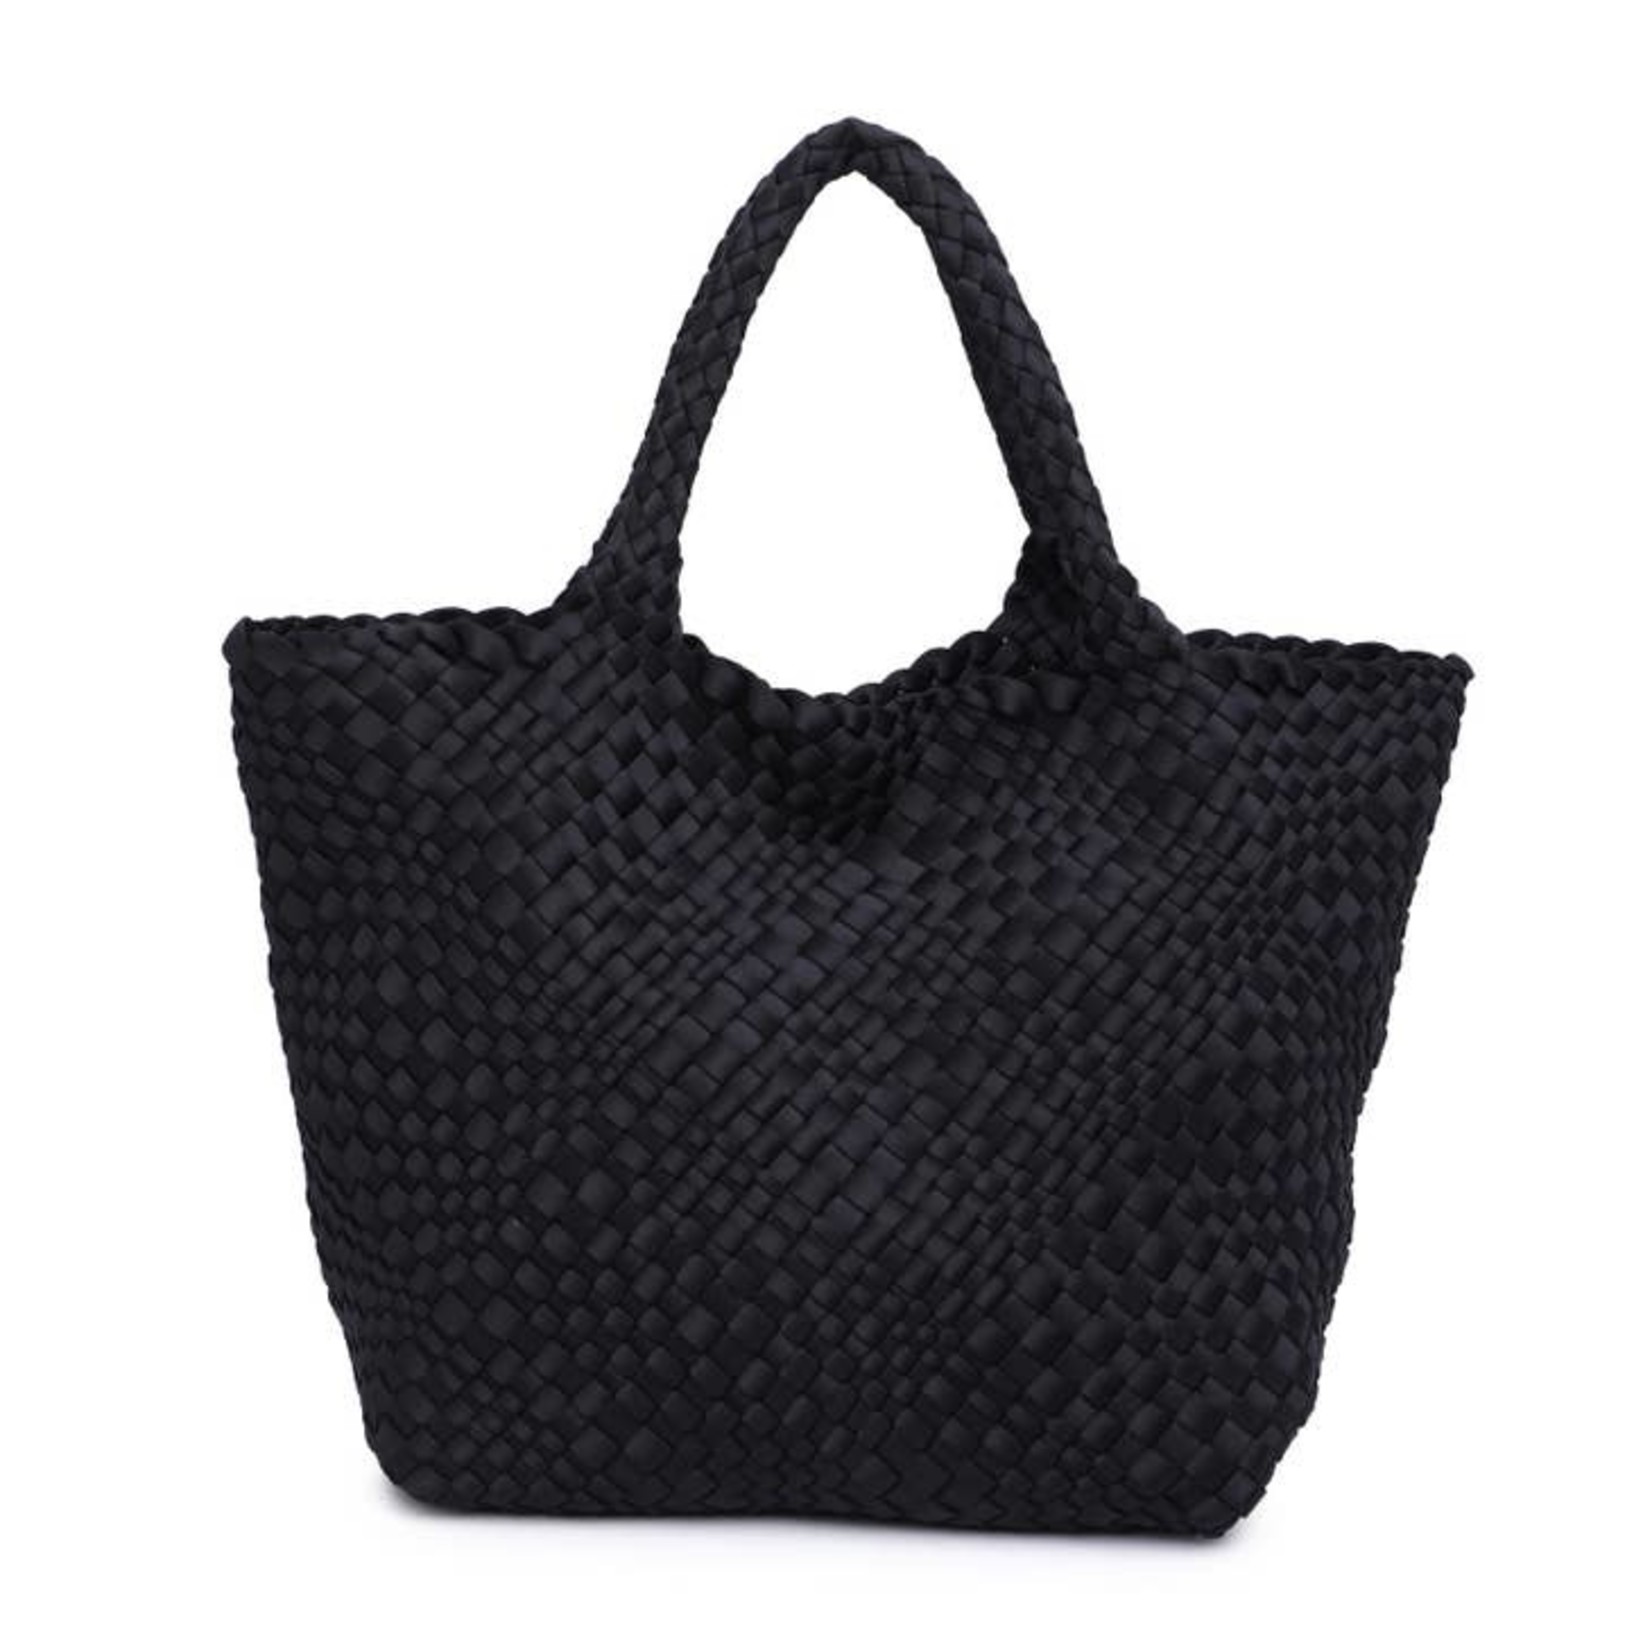 Urban Expressions Azadi Neoprene Woven Tote by Urban Expressions